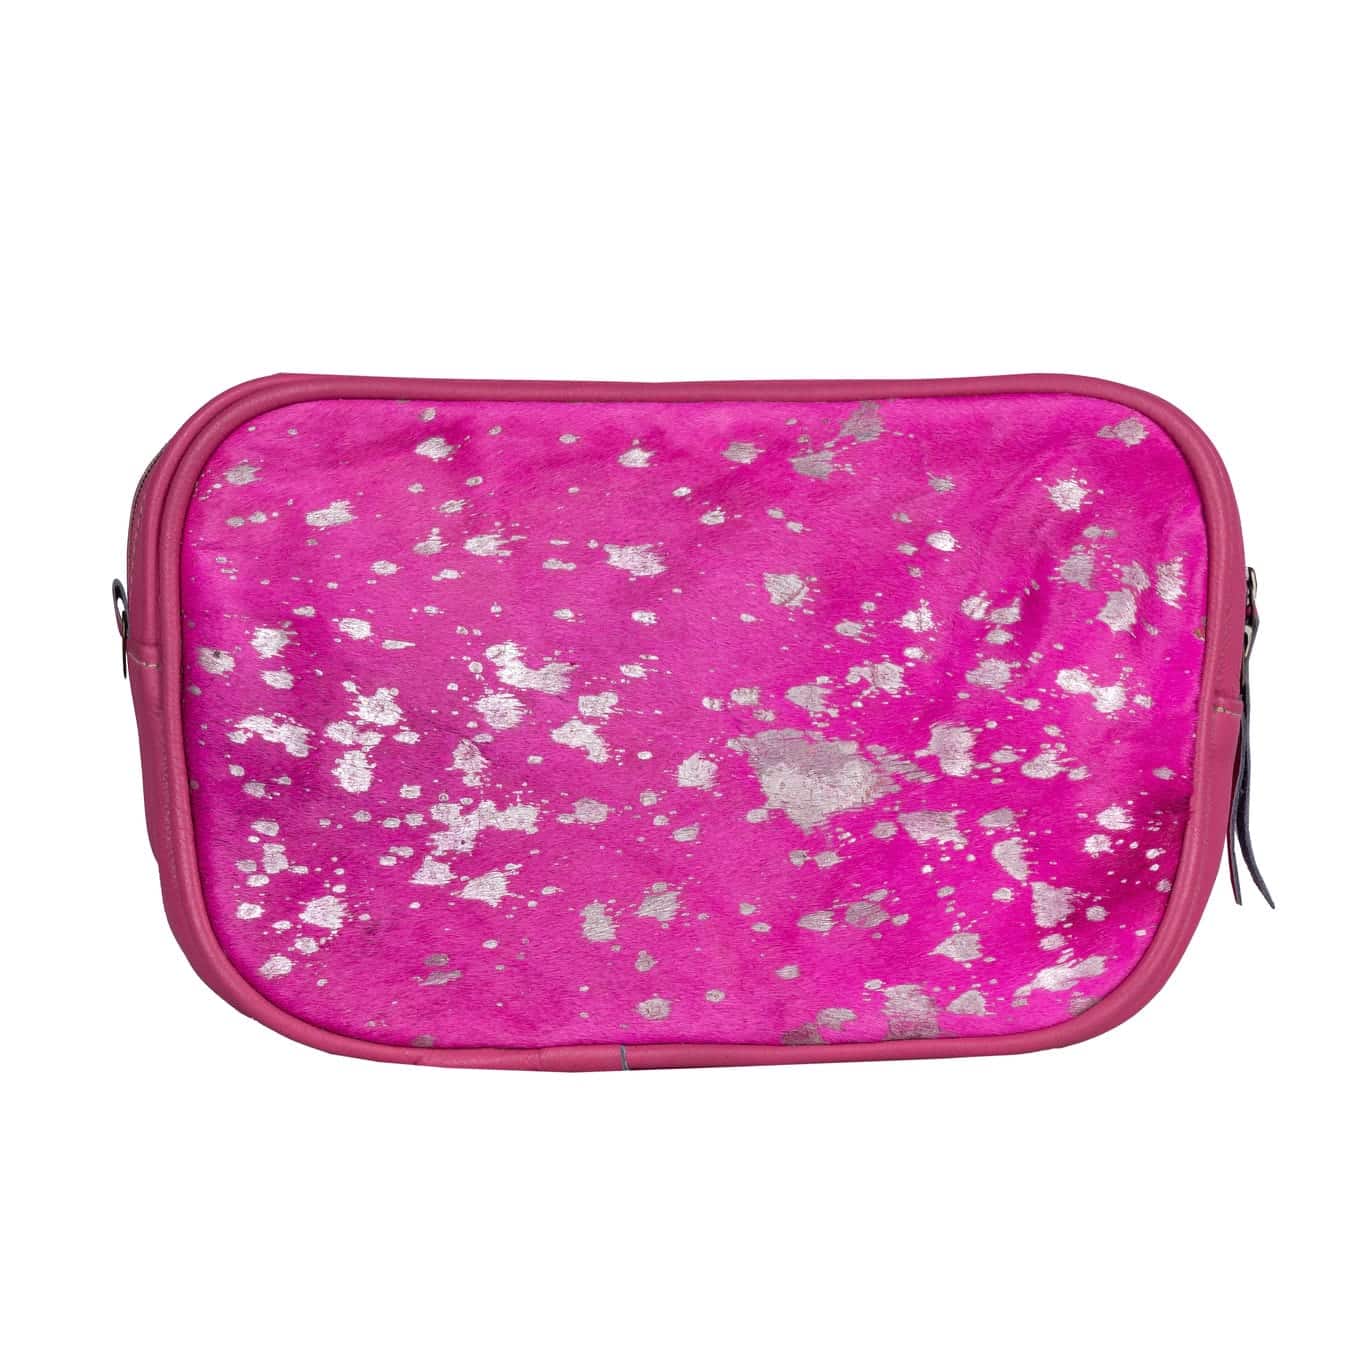 Buy Barbie: Make Up Fashion - Play Bag at Mighty Ape NZ